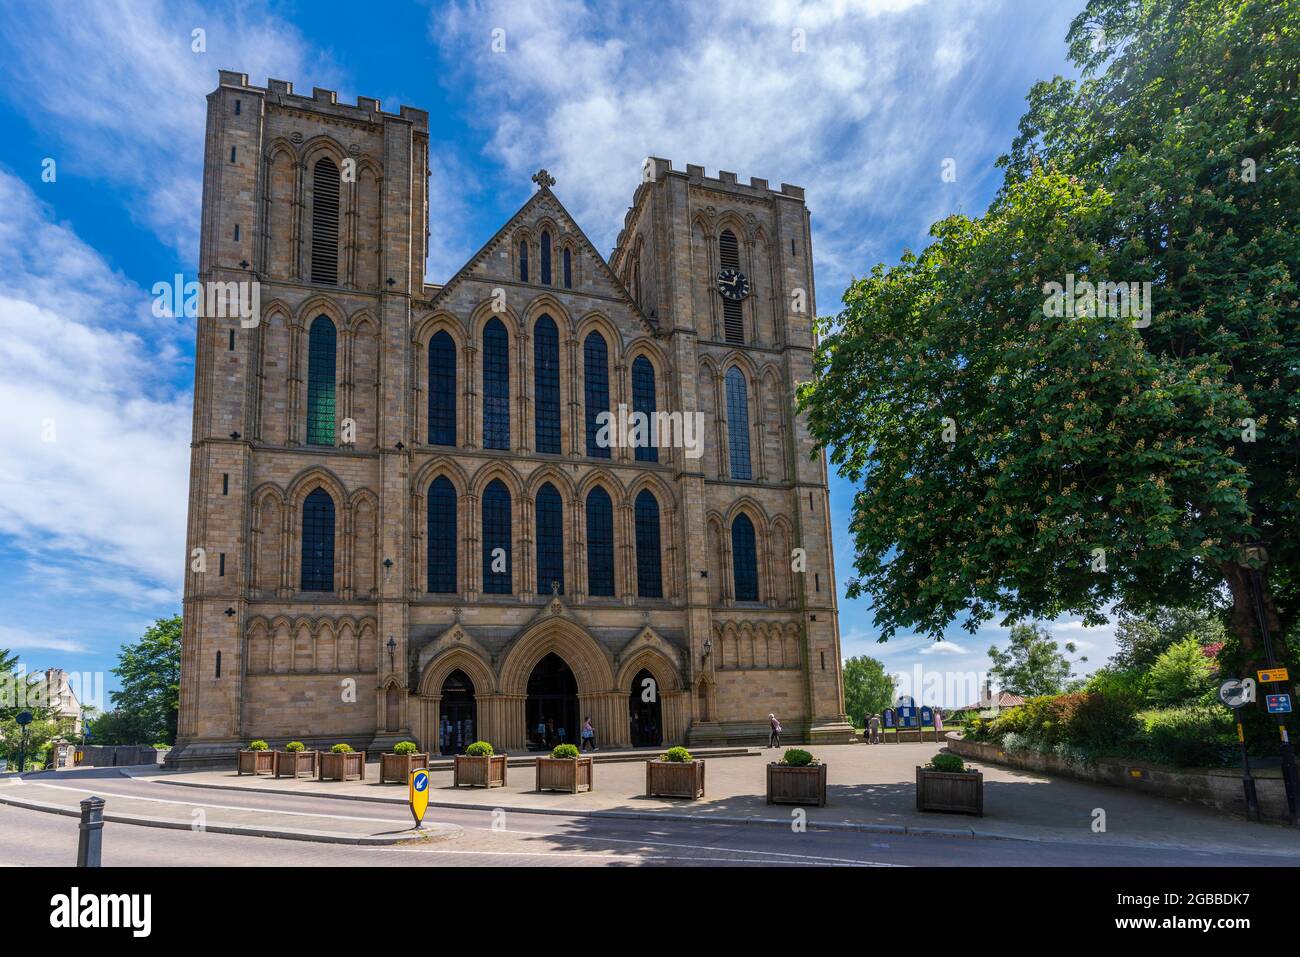 View of Ripon Cathedral Church of St. Peter and St. Wilfrid, Ripon, North Yorkshire, England, United Kingdom, Europe Stock Photo